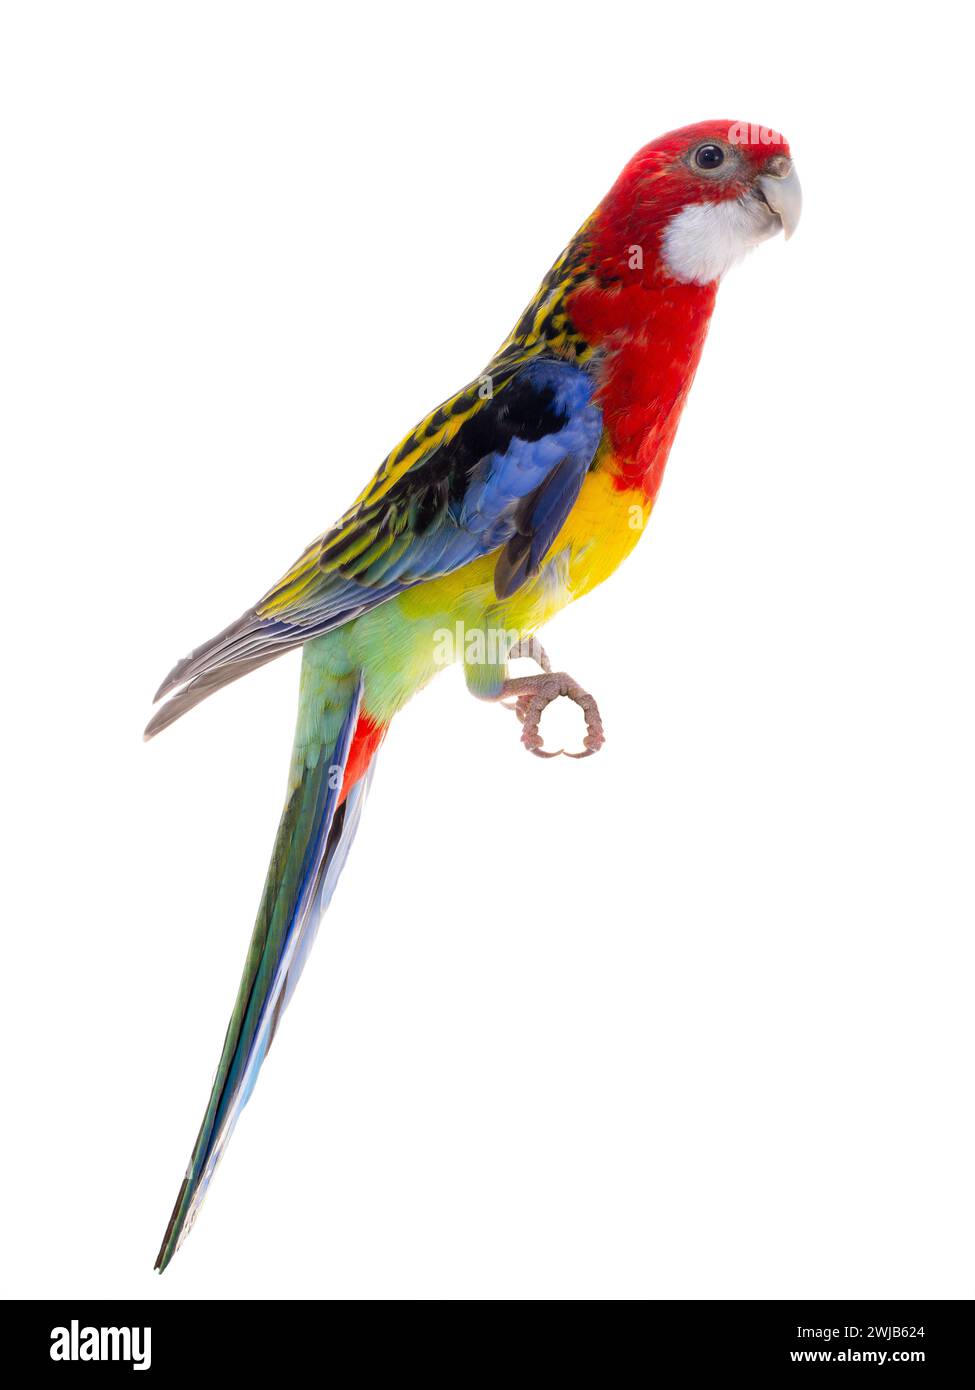 Rosella parrot isolated on white background Stock Photo